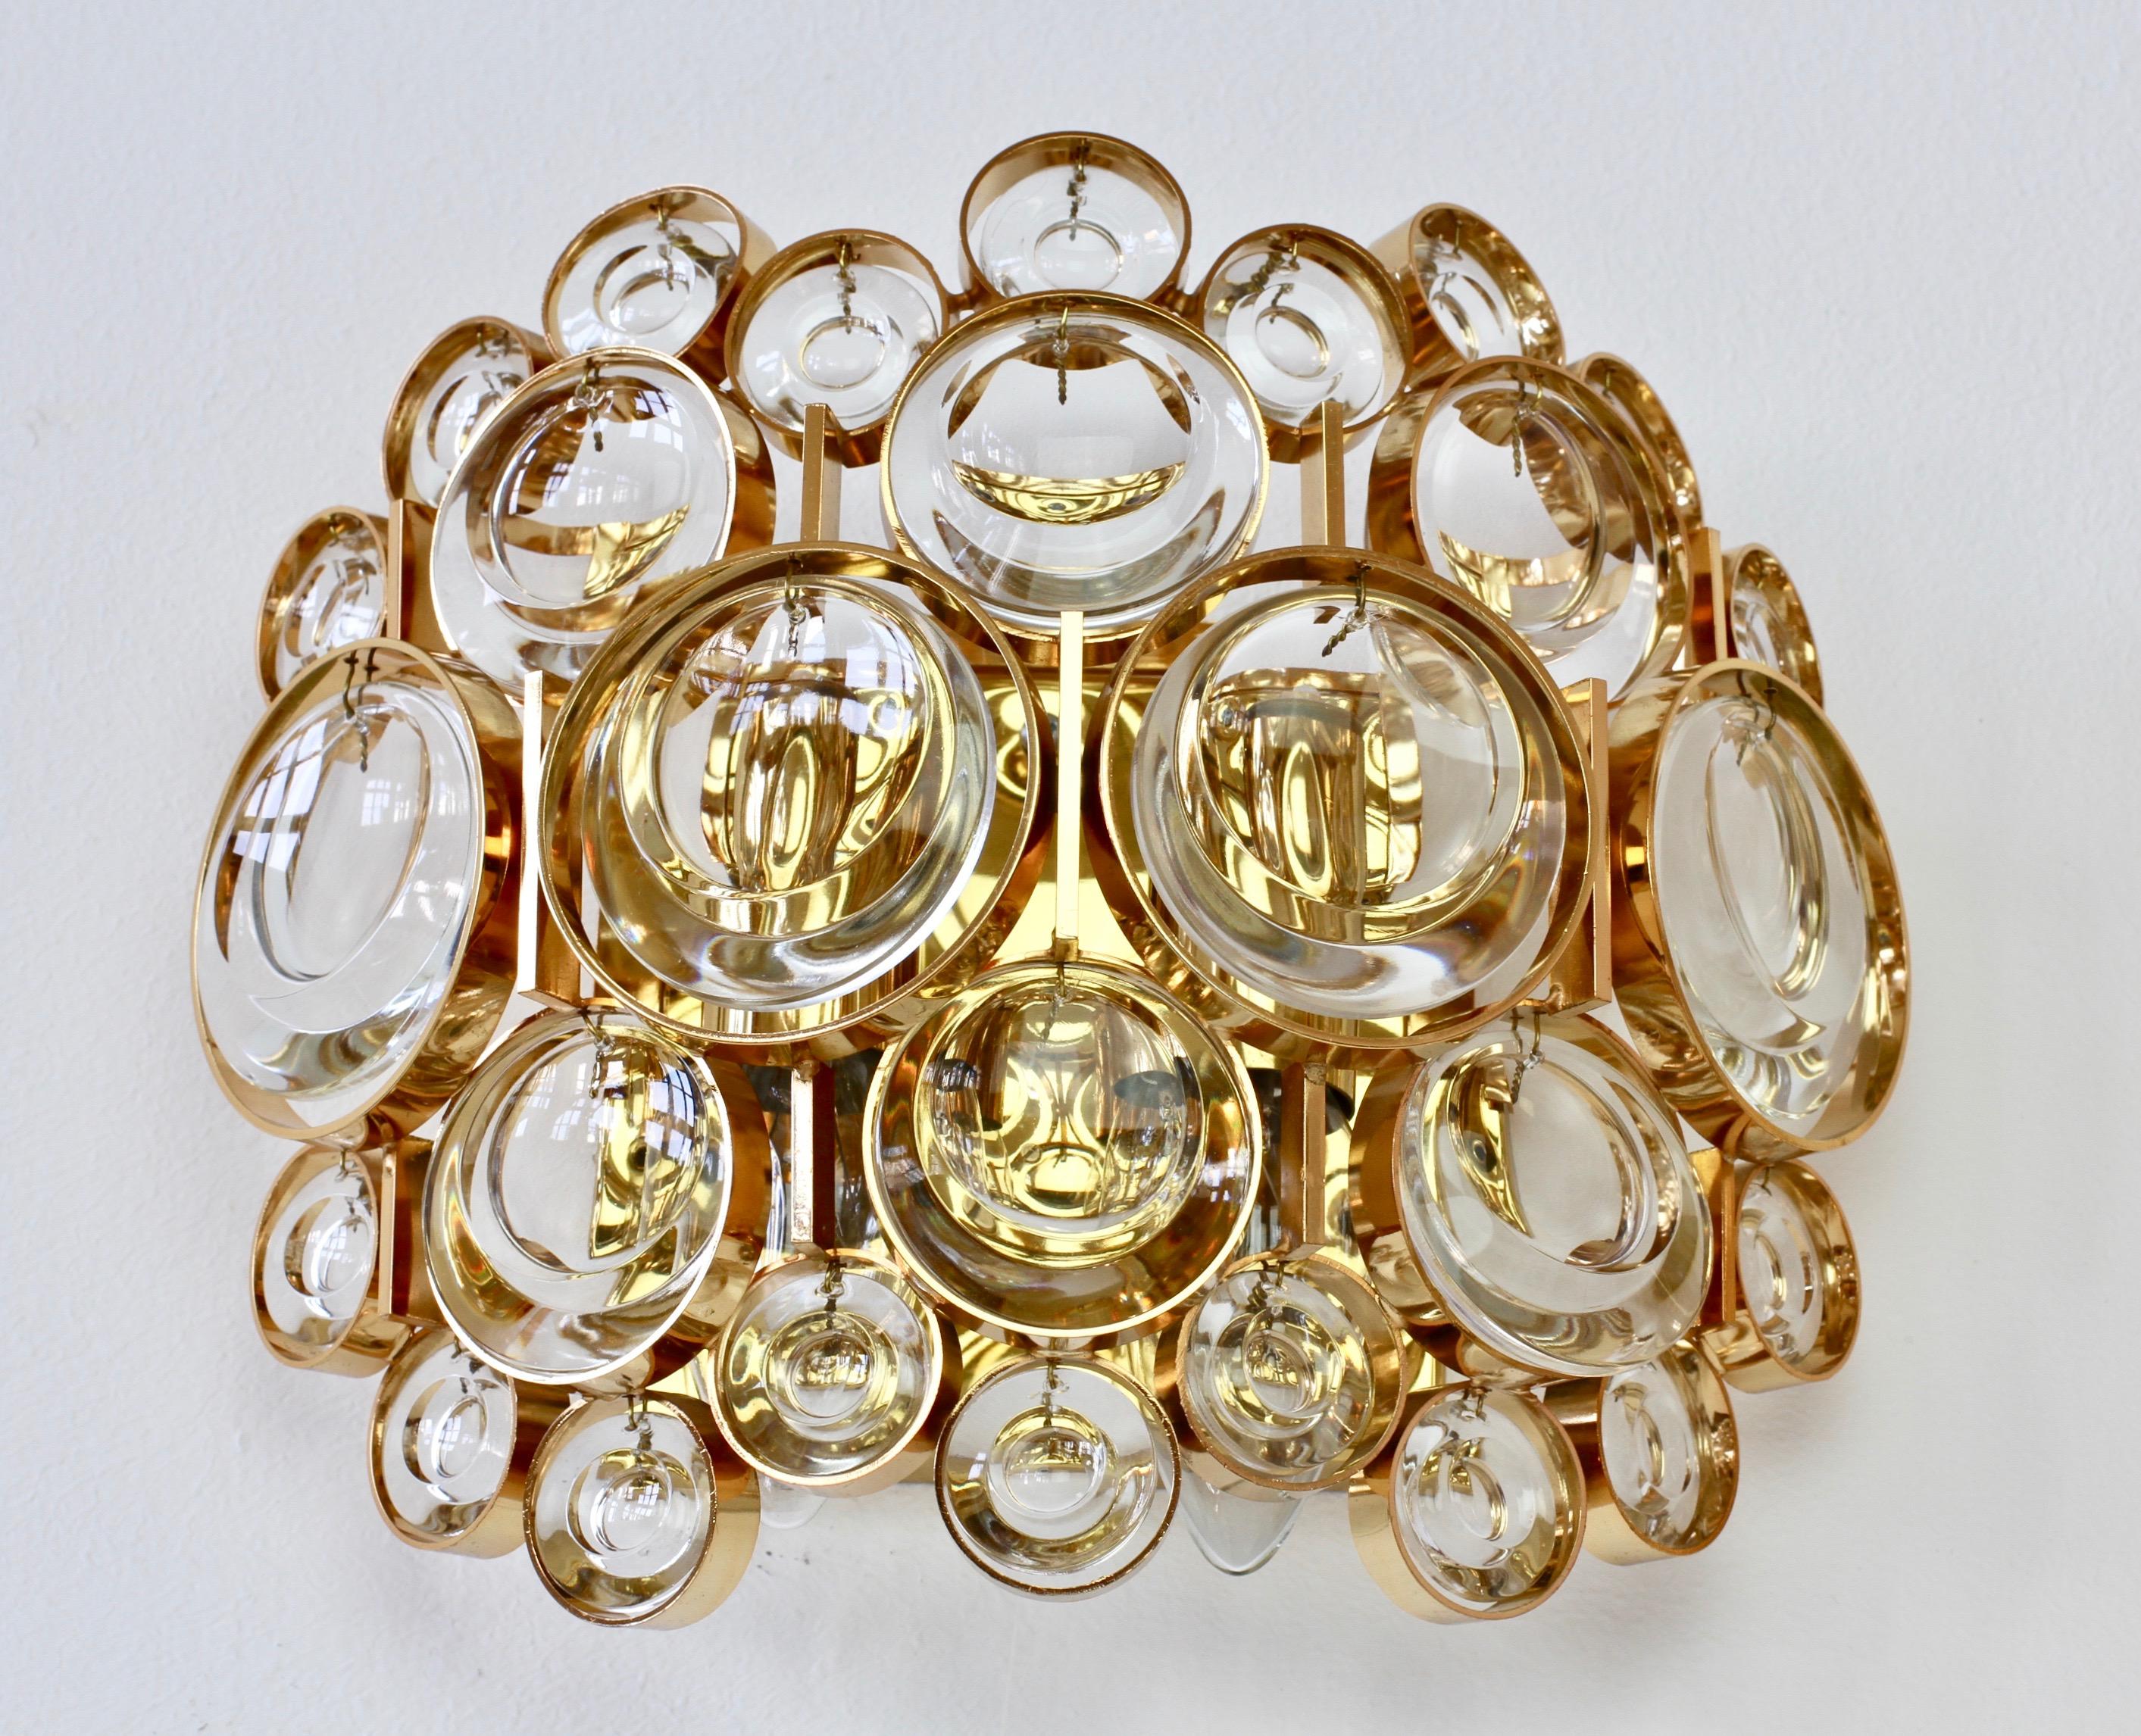 Stunning Pair of German Mid-Century Crystal Glass Wall Lights / Sconces by Palwa 5